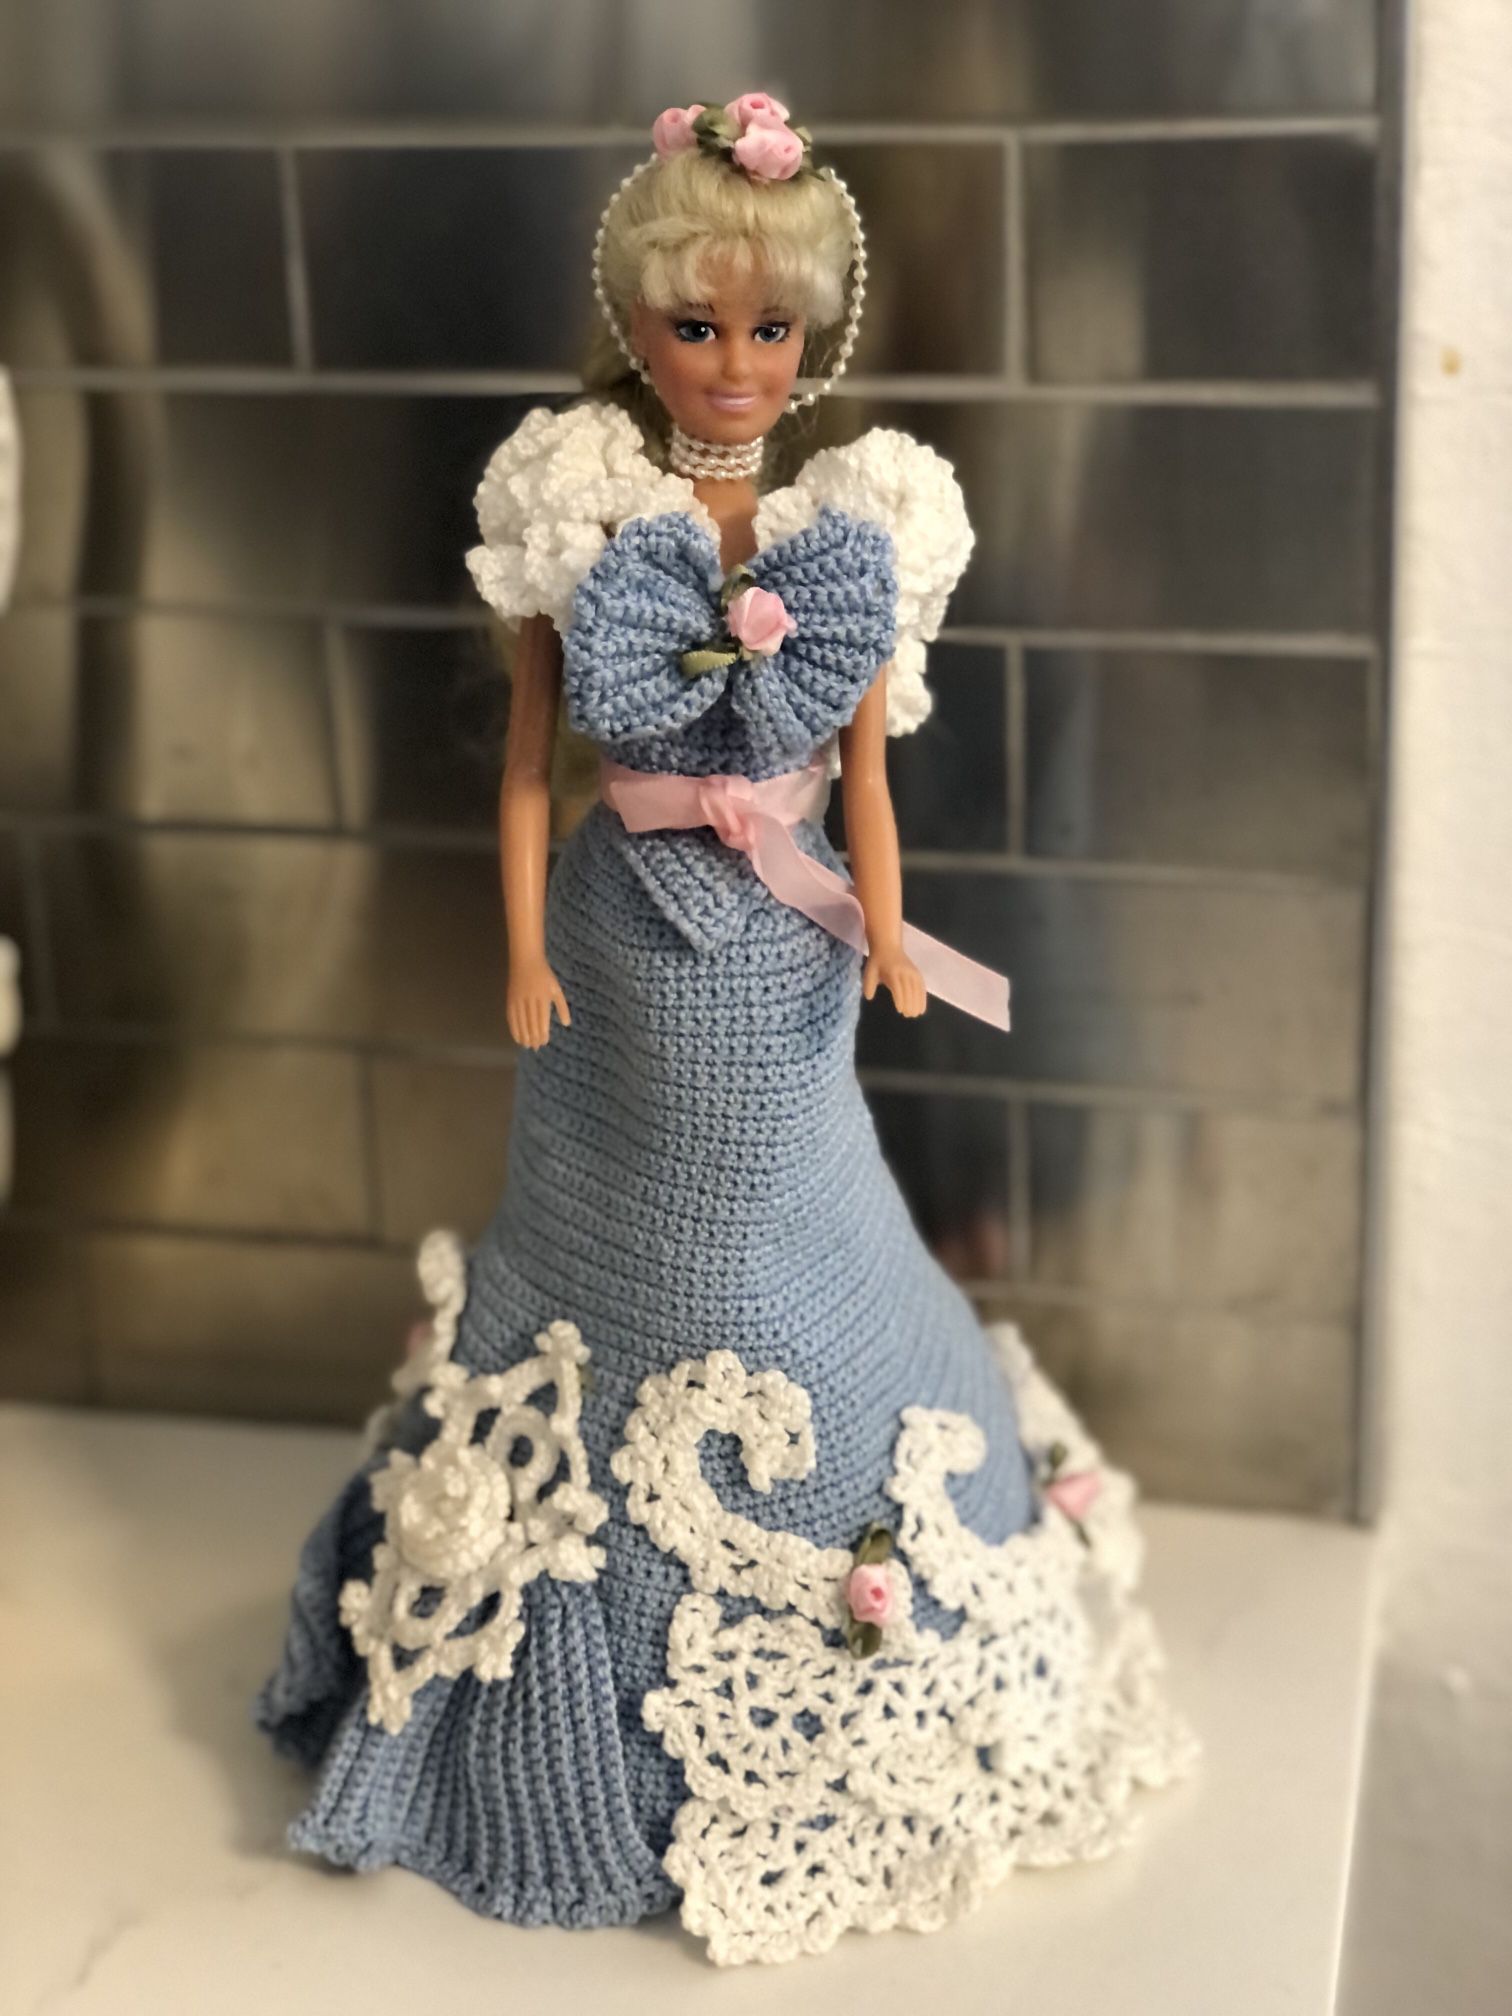 12 inch Barbie with beautifully knitted dress